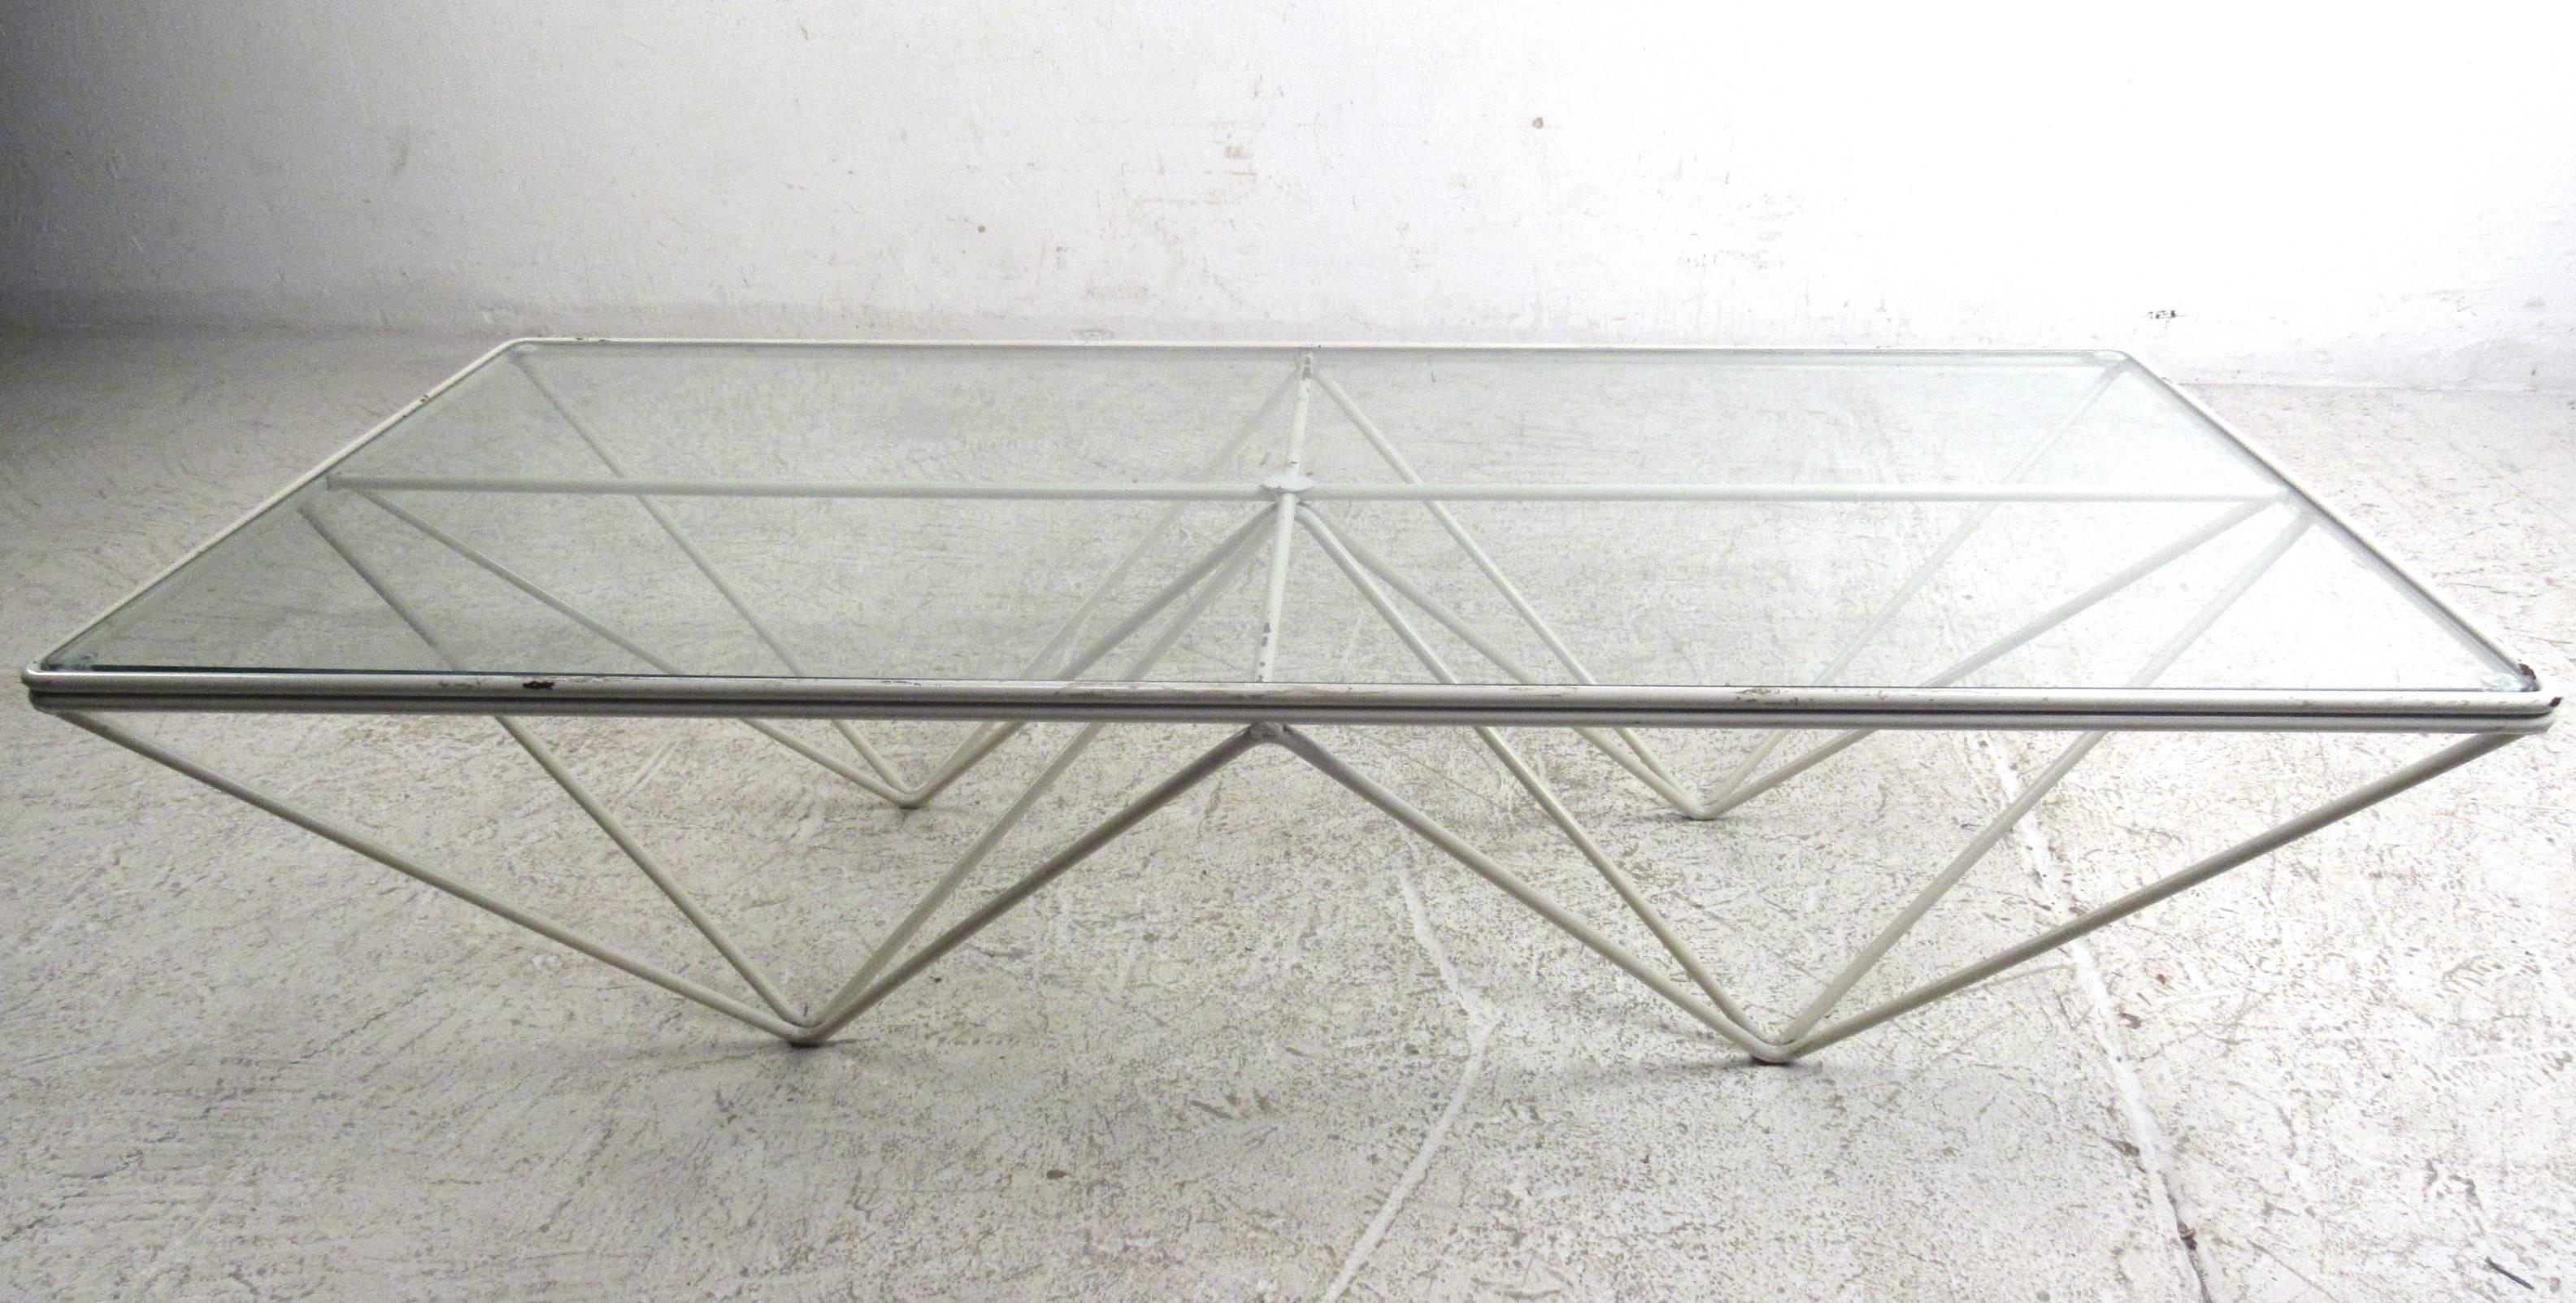 The unique modern design sets apart this metal frame geometric coffee table, making it a visually impressive addition to any seating area. Please confirm item location (NY or NJ).